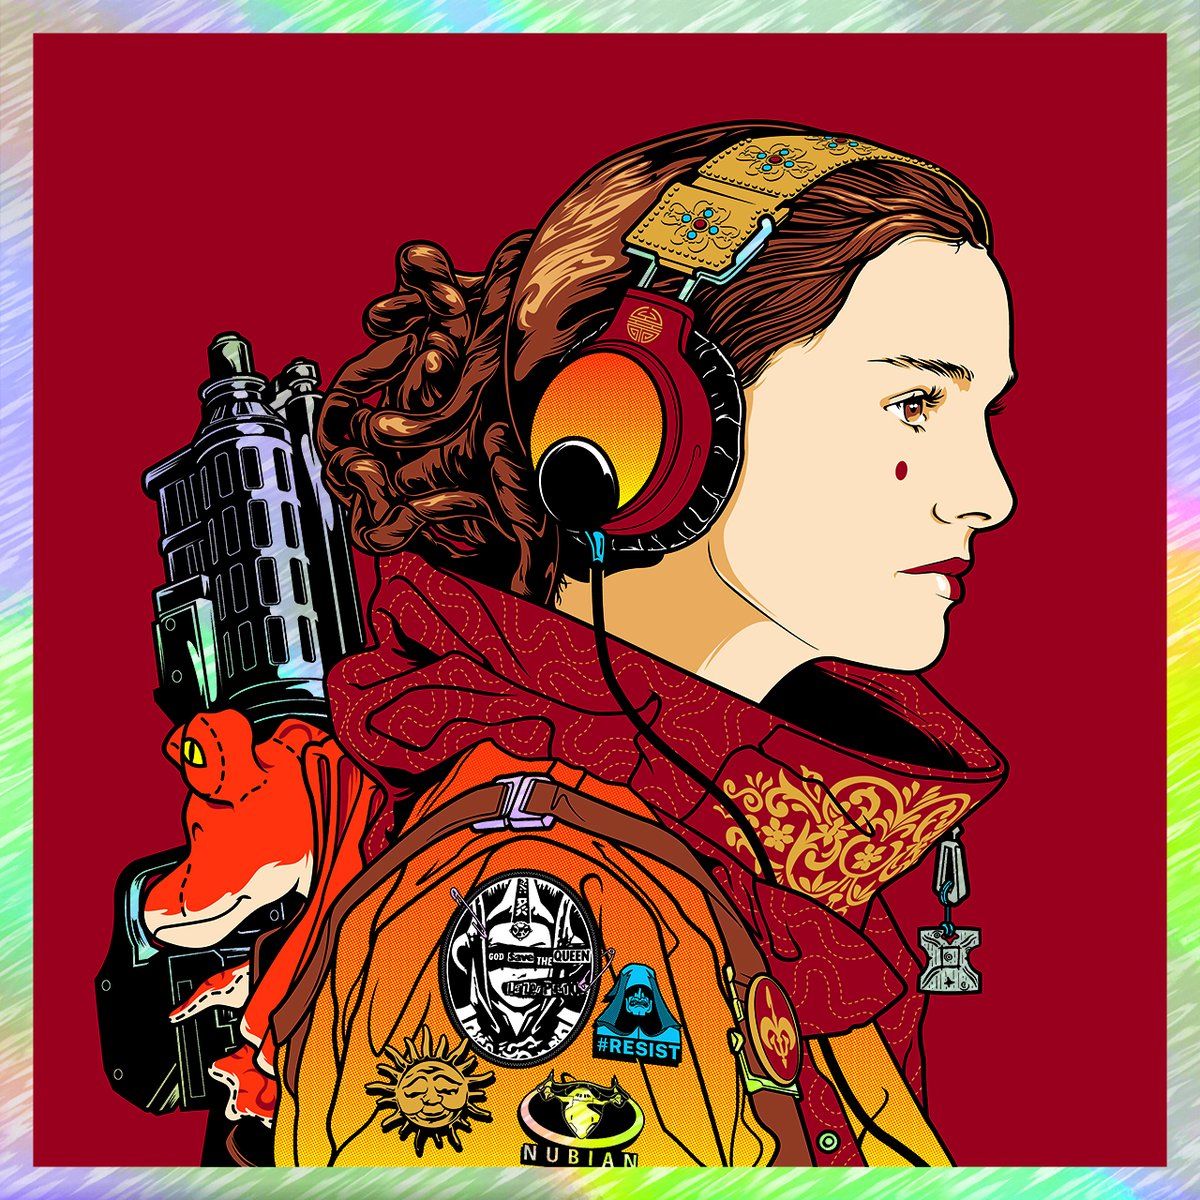 Happy #MayTheFourth! Celebrate the biggest holiday in all the galaxies with 'Veré (#PadmeAmidala)' by @JBudich. This Jedi approved screen print is available on six unique foils variants, limited to 25 in each edition! spoke-art.com/collections/st… #JoshuaBudich #SpokeArt #Maythe4th